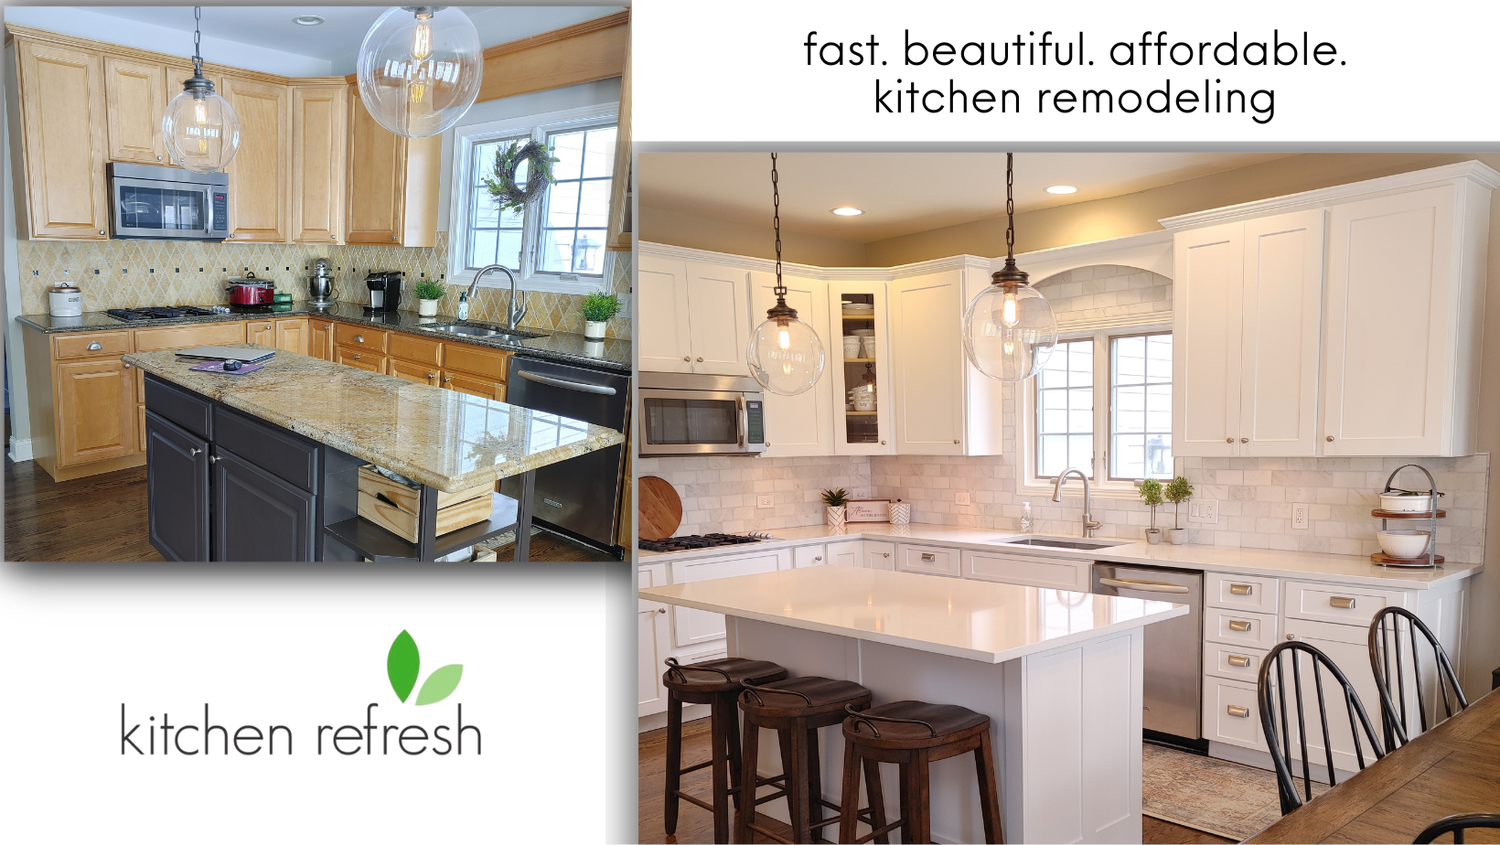 Cabinet Refacing & Kitchen Remodeling, Reinvented! Your Fast, Beautiful ...